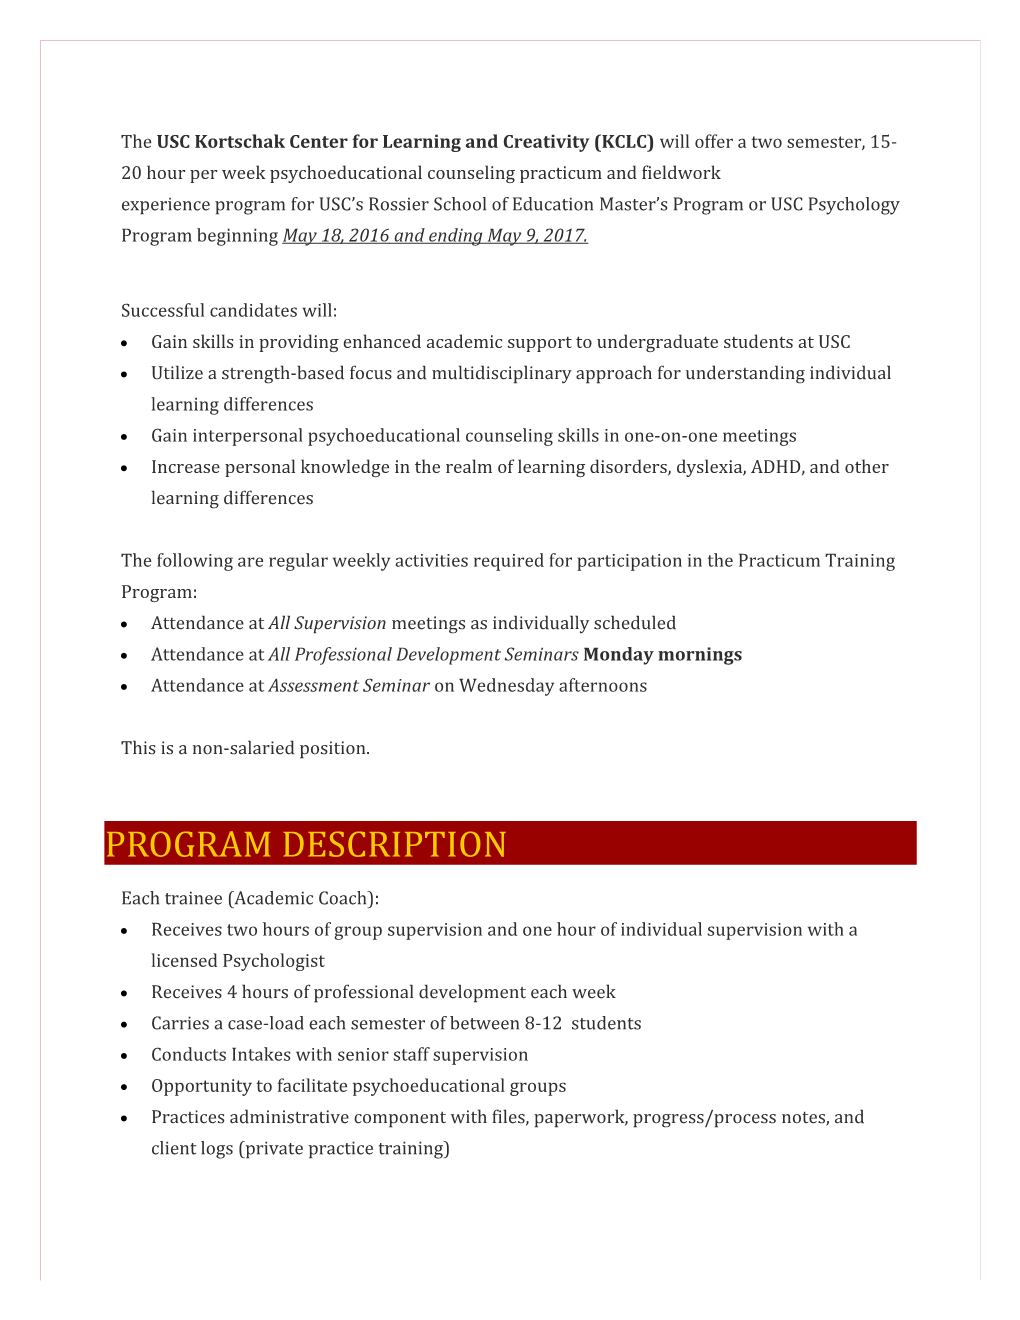 Gain Skills in Providing Enhanced Academic Support to Undergraduate Students at USC